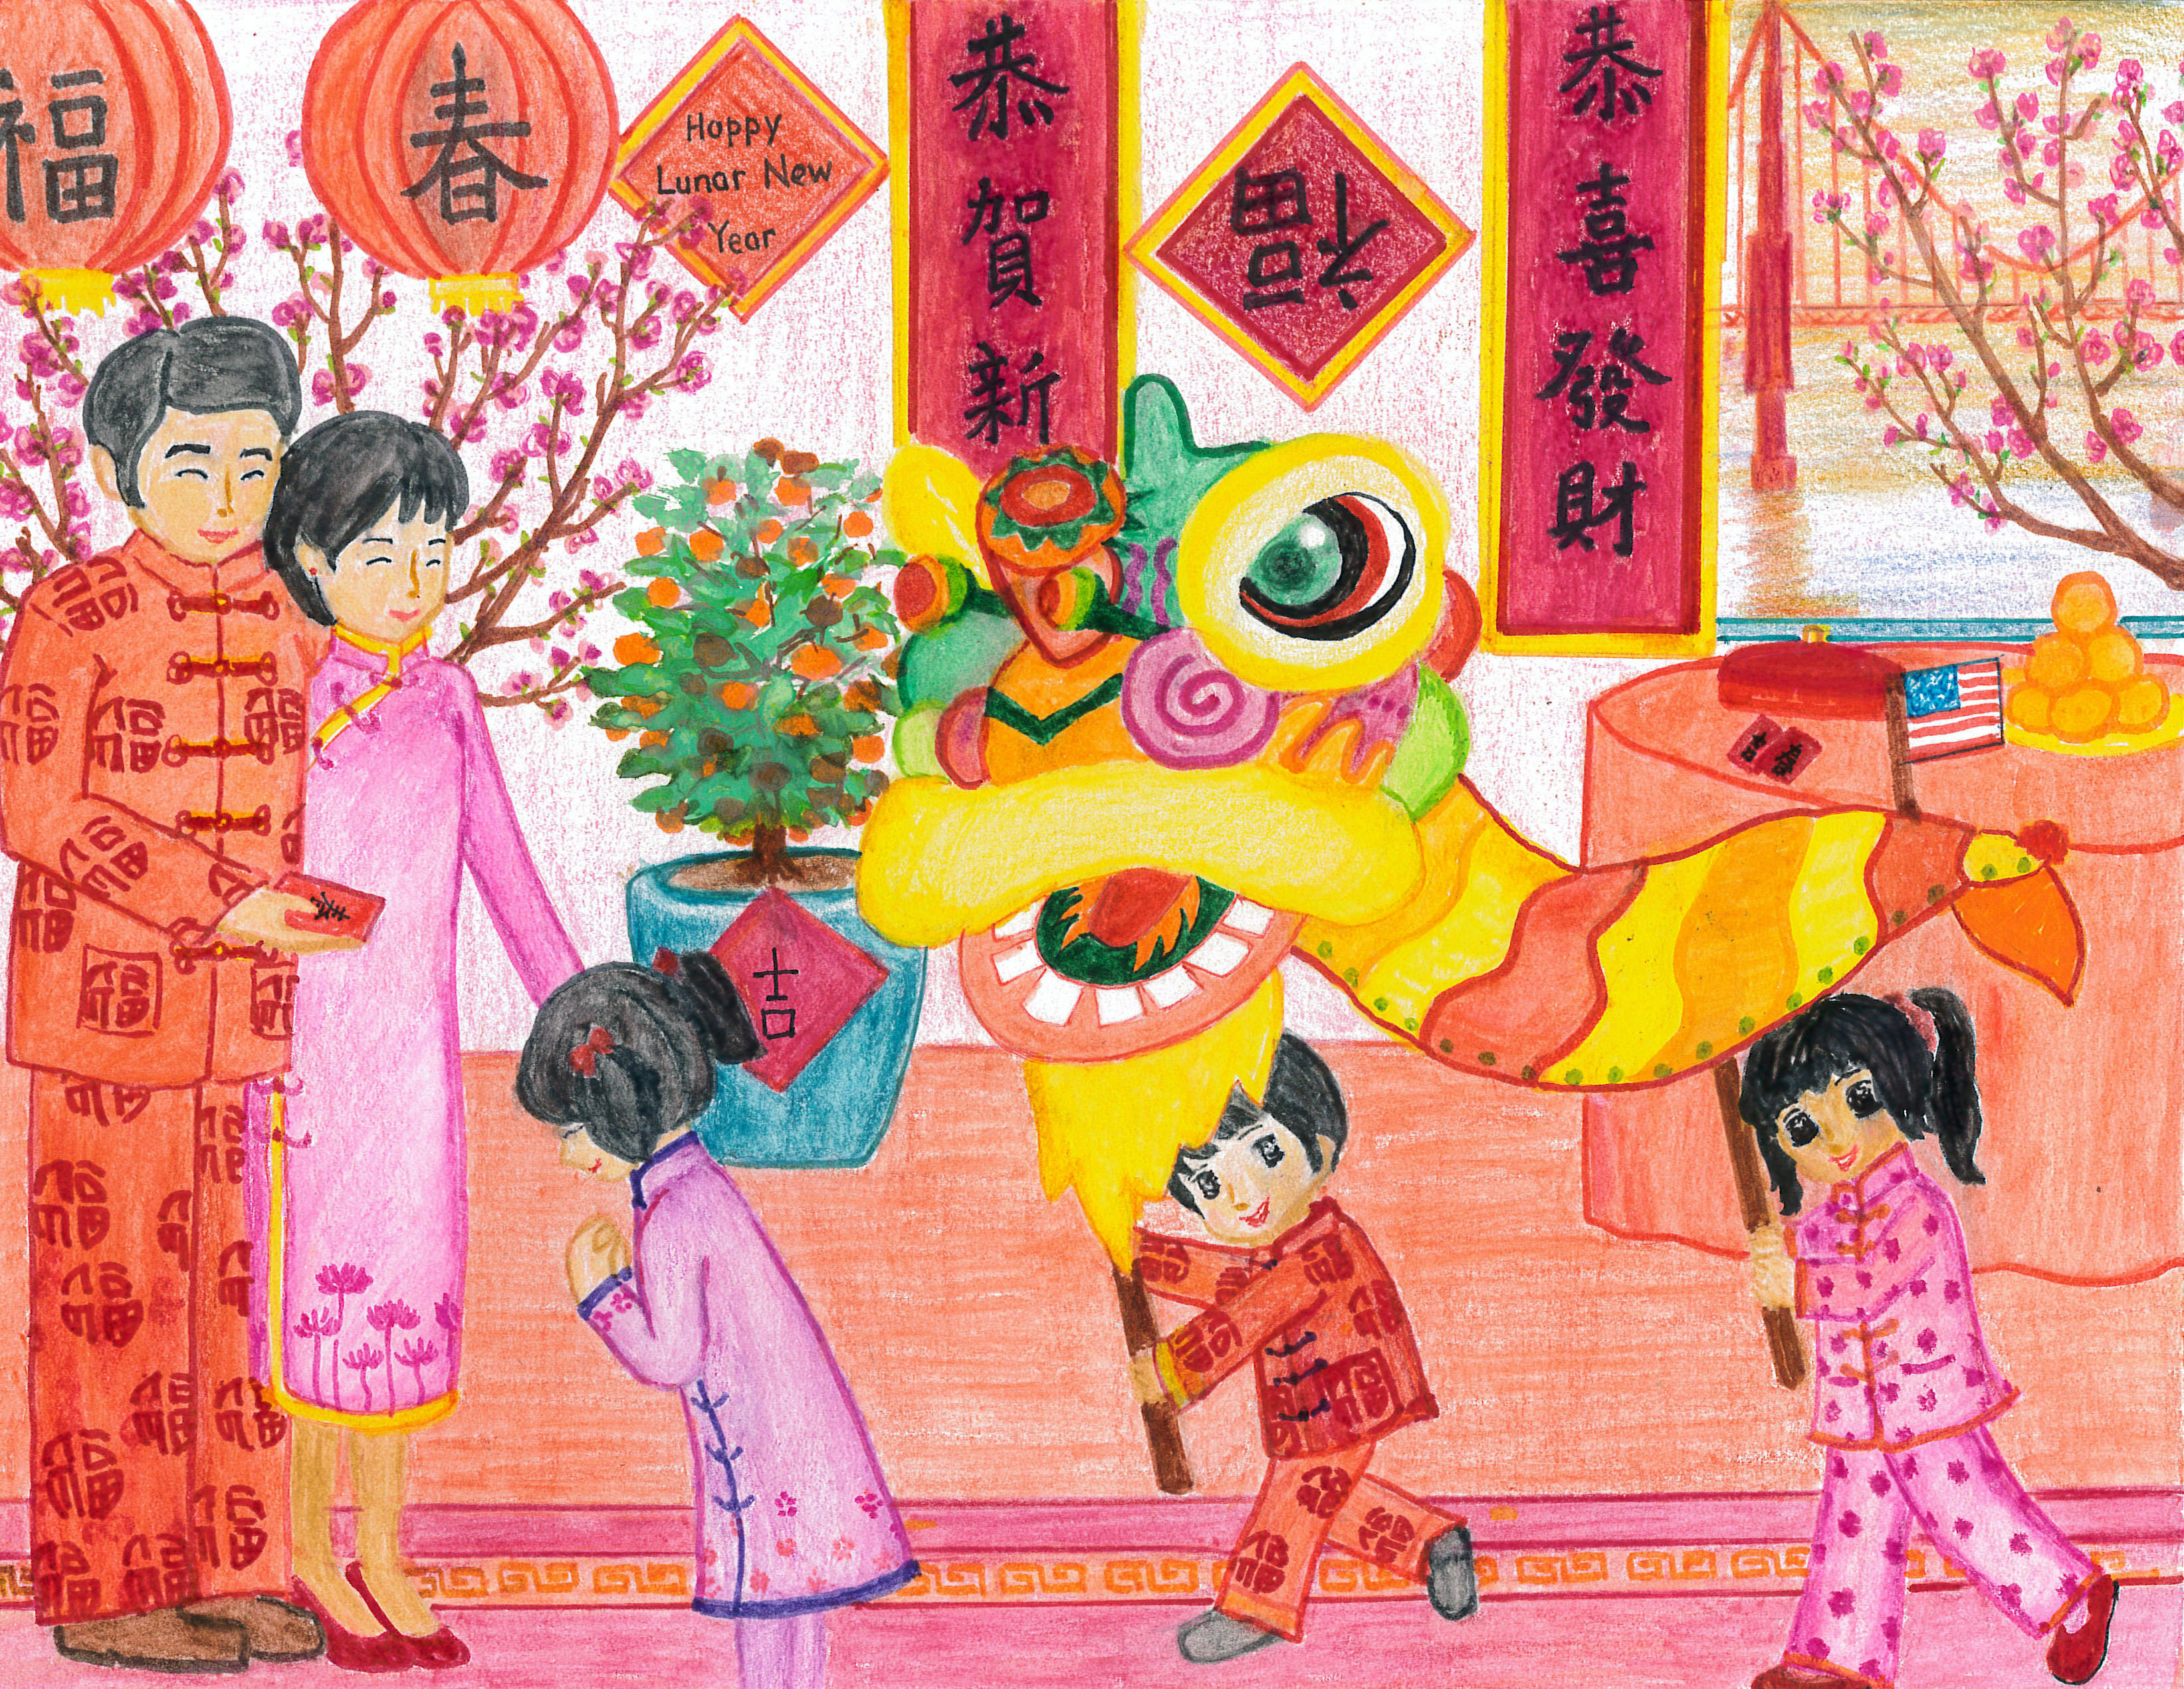 Christine Yiu / My family celebrates the Chinese New Year, the most important celebration in Chinese culture / Honorable Mention